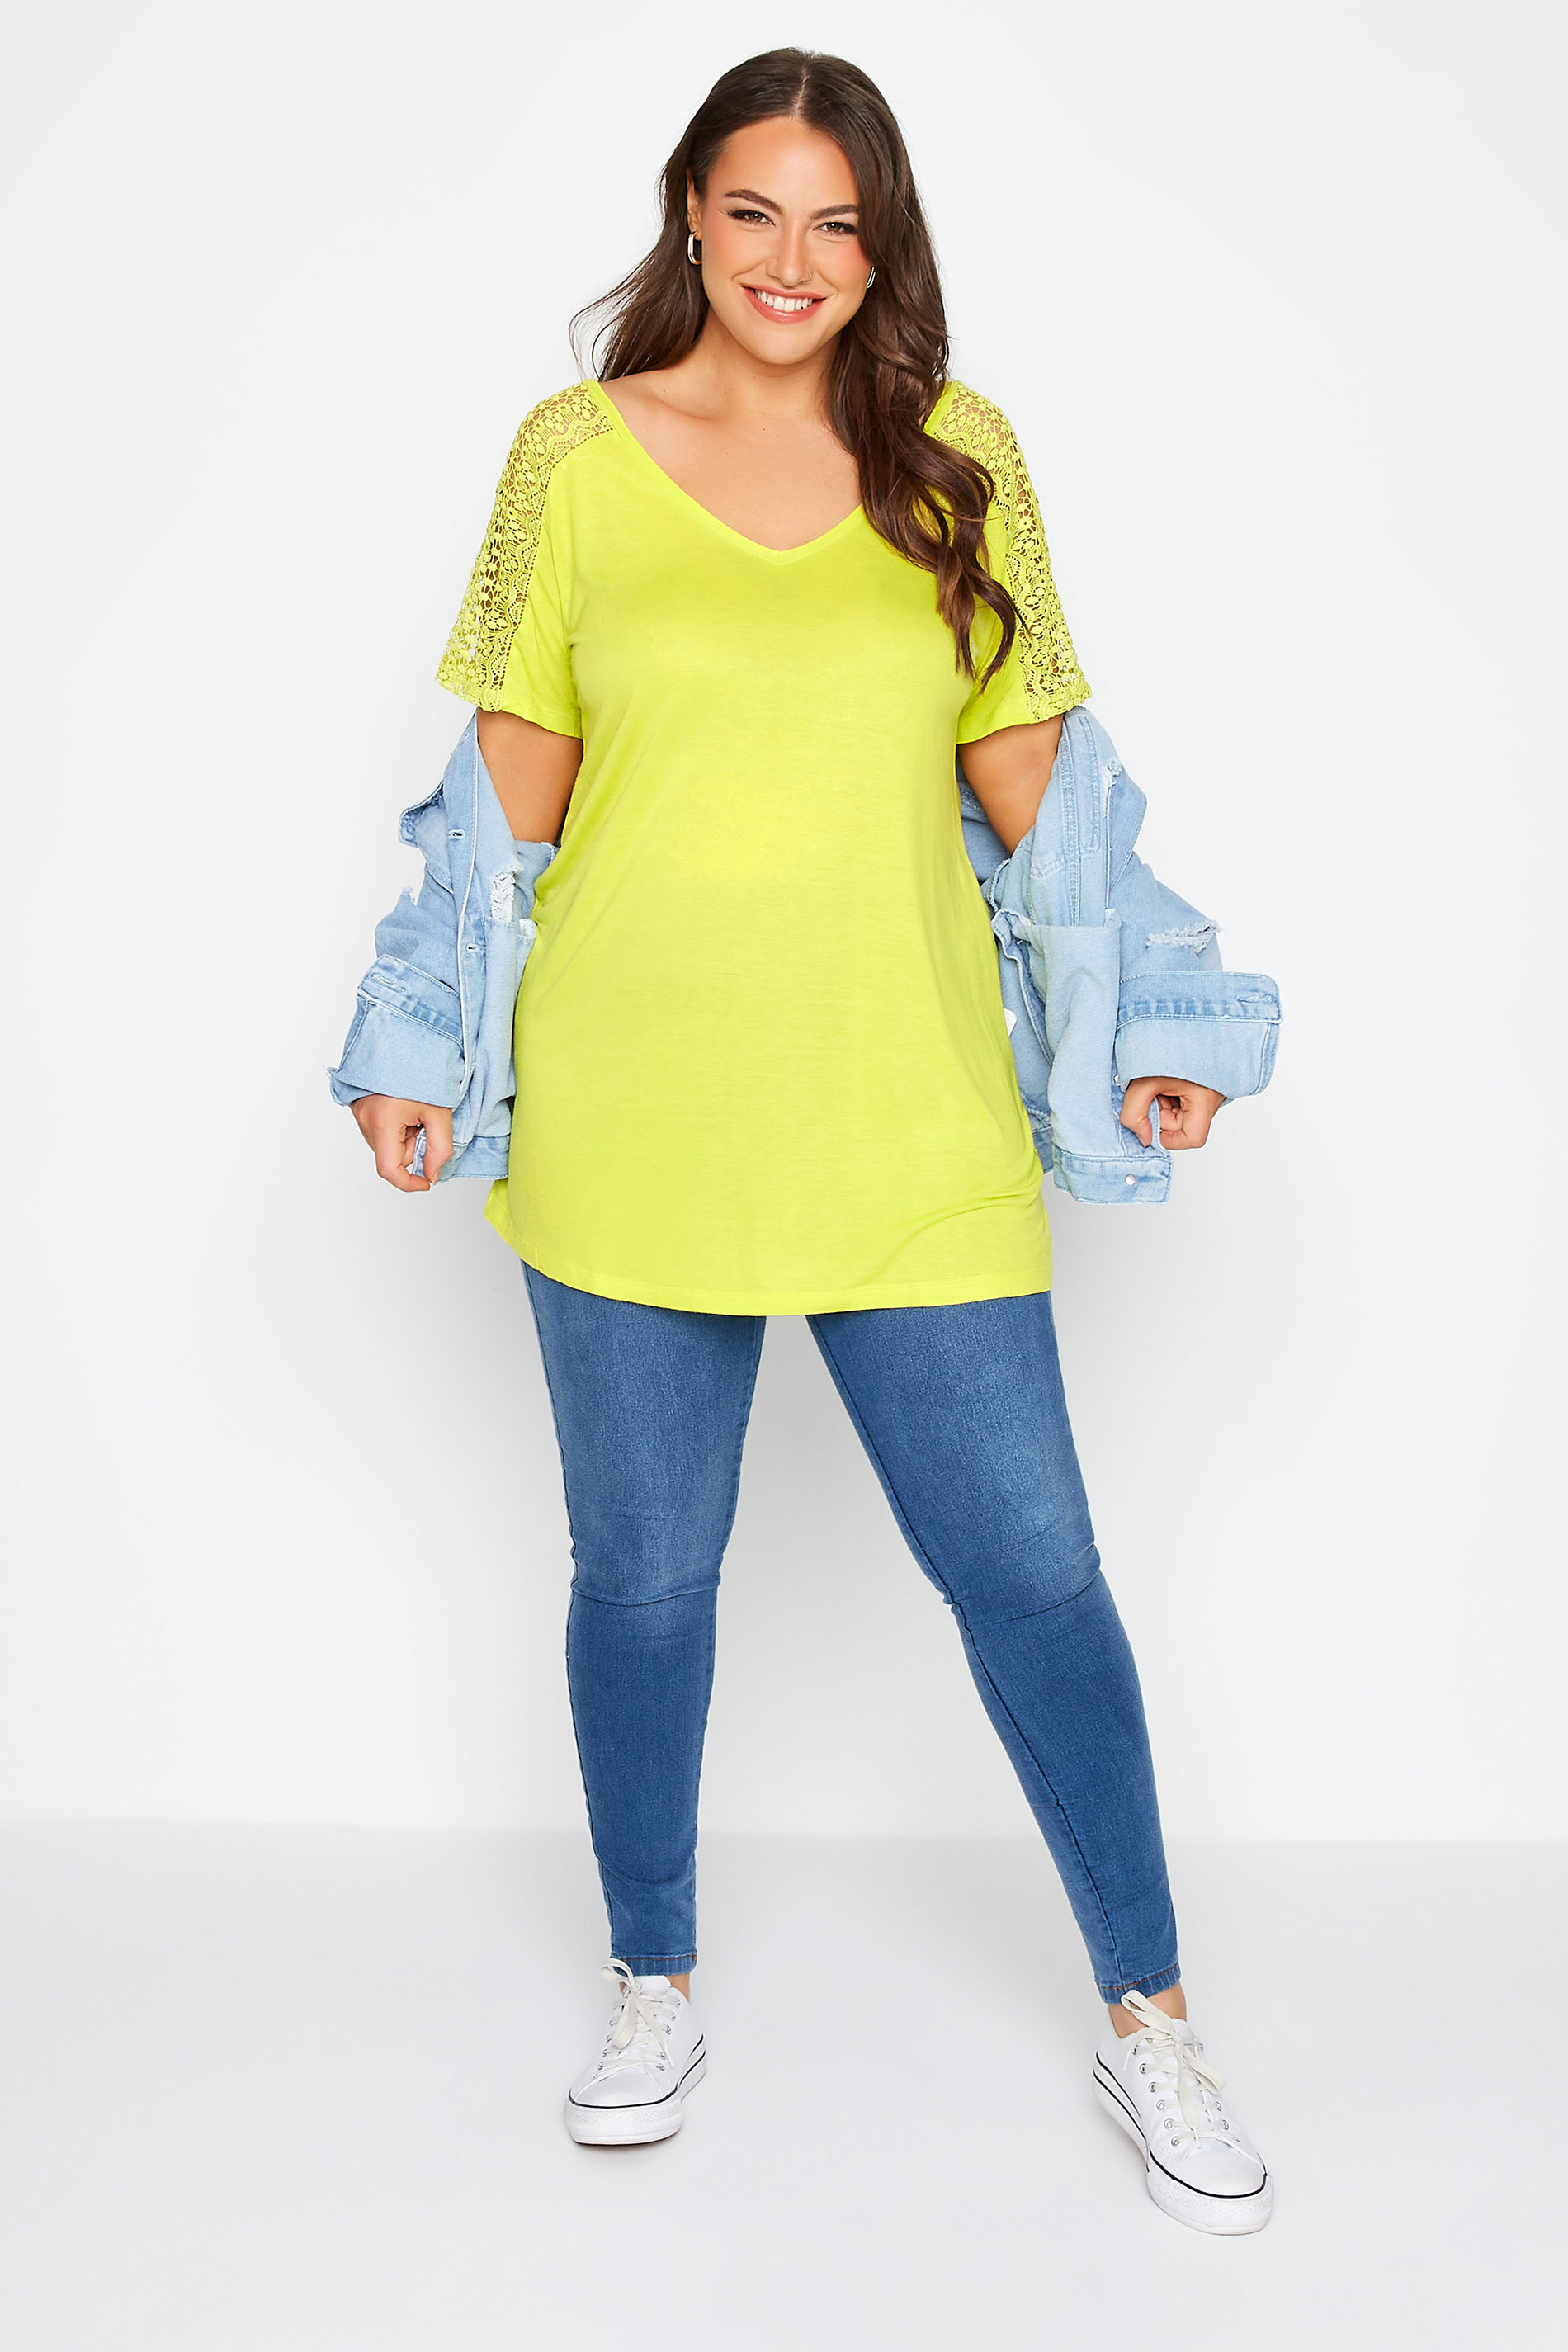 Grande taille  Tops Grande taille  T-Shirts | T-Shirt Vert Citron Manches Dentelle - SO23045